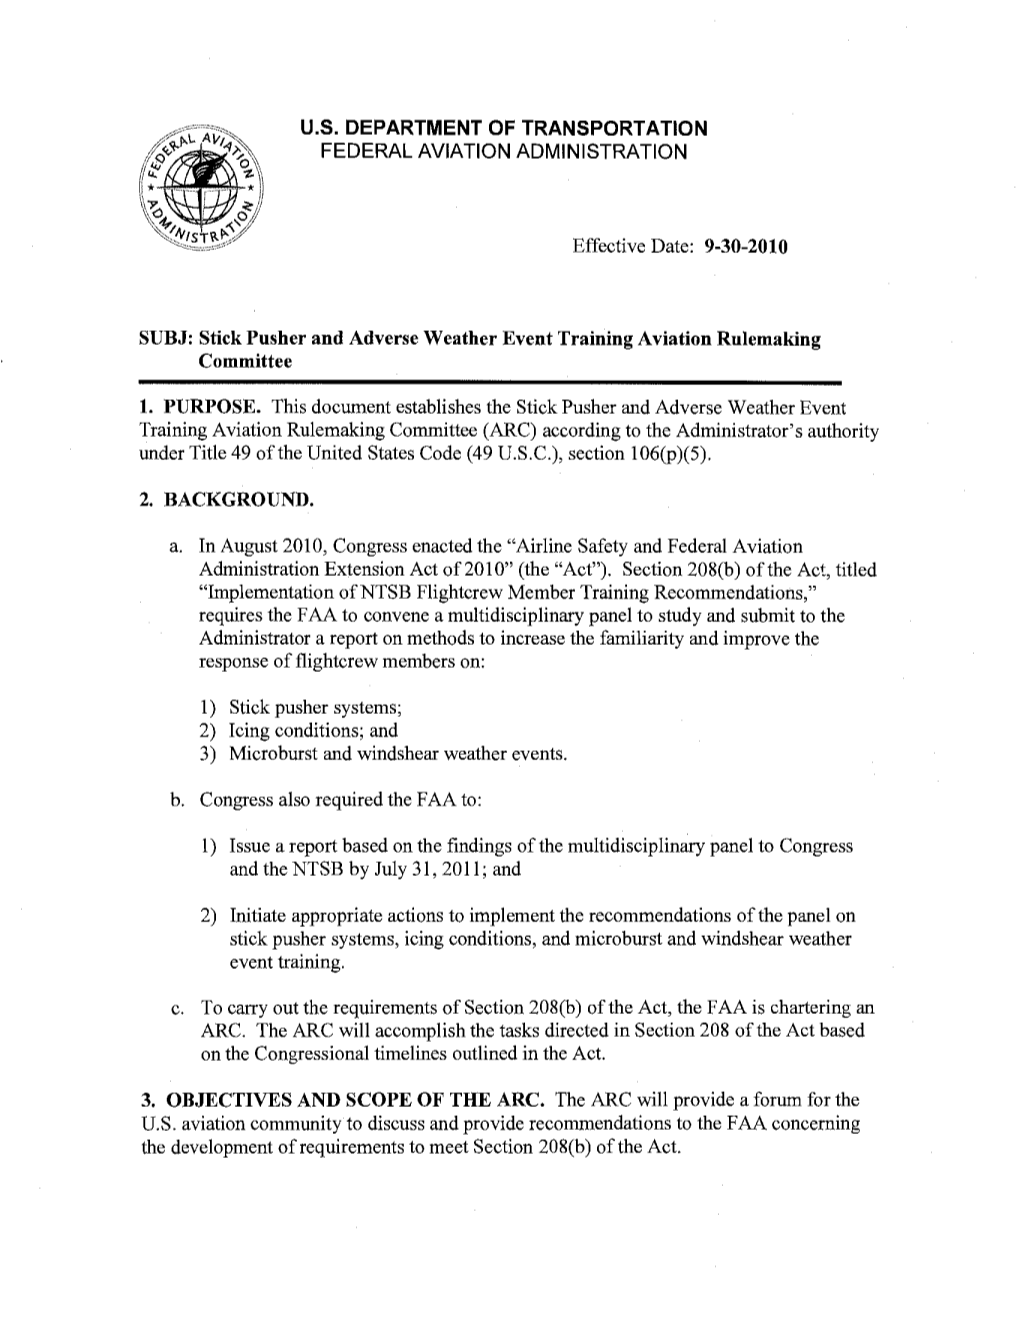 Stick Pusher and Adverse Weather Event Training Aviation Rulemaking Committee